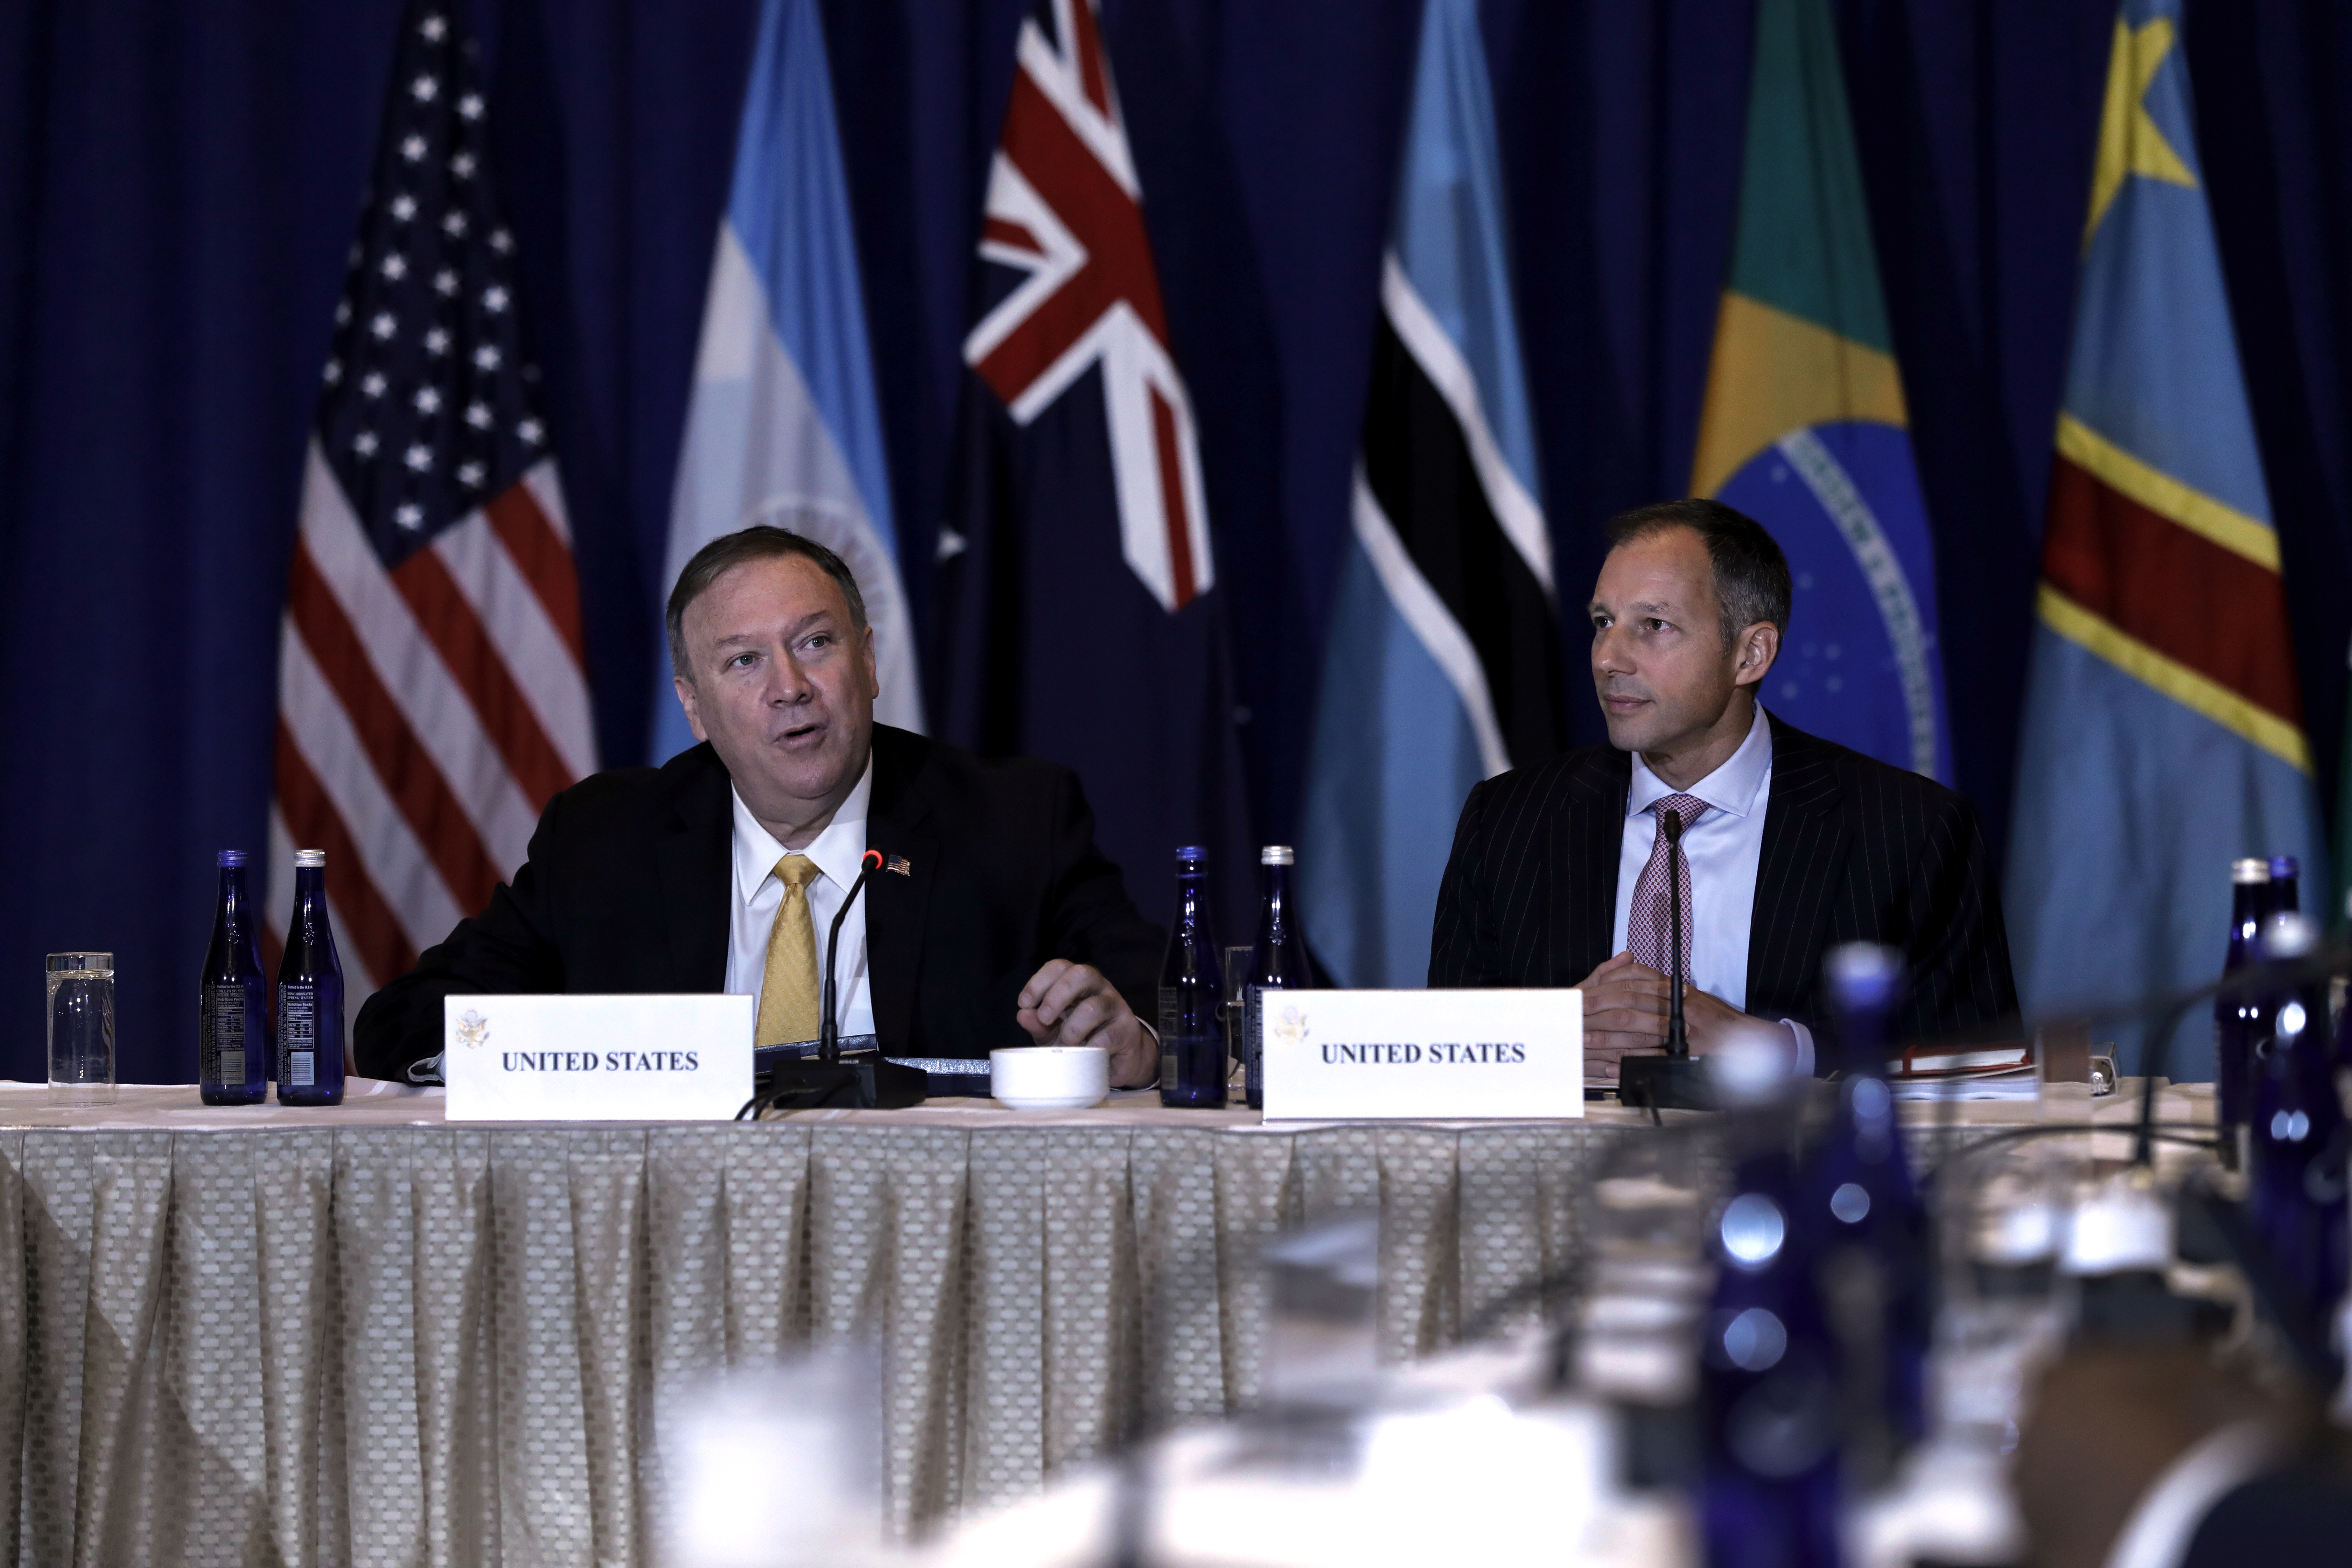 epa07871387 US Secretary of State Mike Pompeo (L) speaks the Energy Resource Governance Initiative conference at  the Lotte New York  Palace Hotel in New York, New York, USA, 26 September 2019. The conference is to promote sound governance and resilient energy mineral supply chains.  EPA/Peter Foley